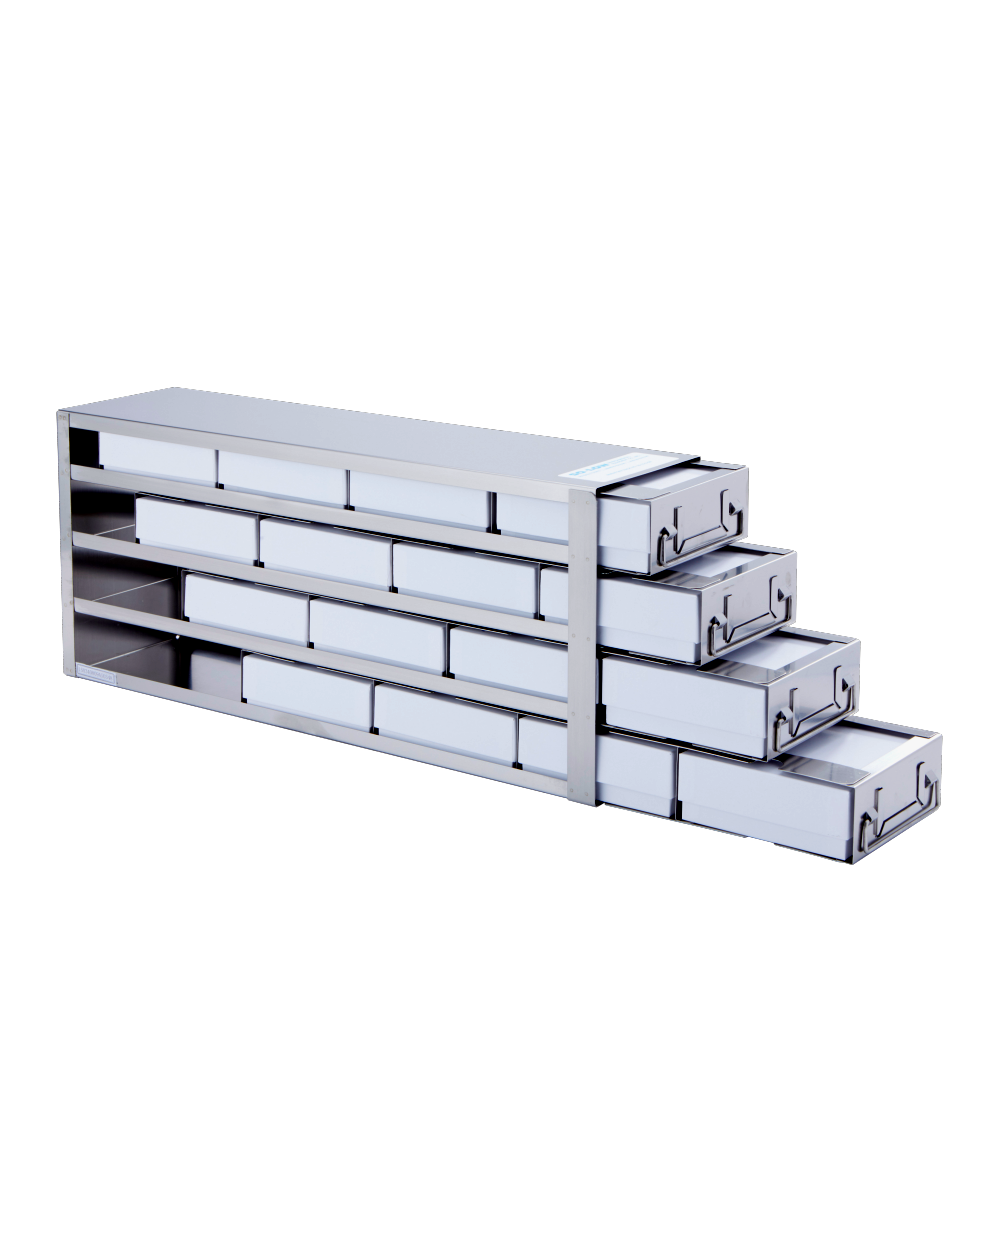 So-Low 22 x 9-7/16 x 5-1/2” - 16 slide out shelves with 2” cardboard boxes